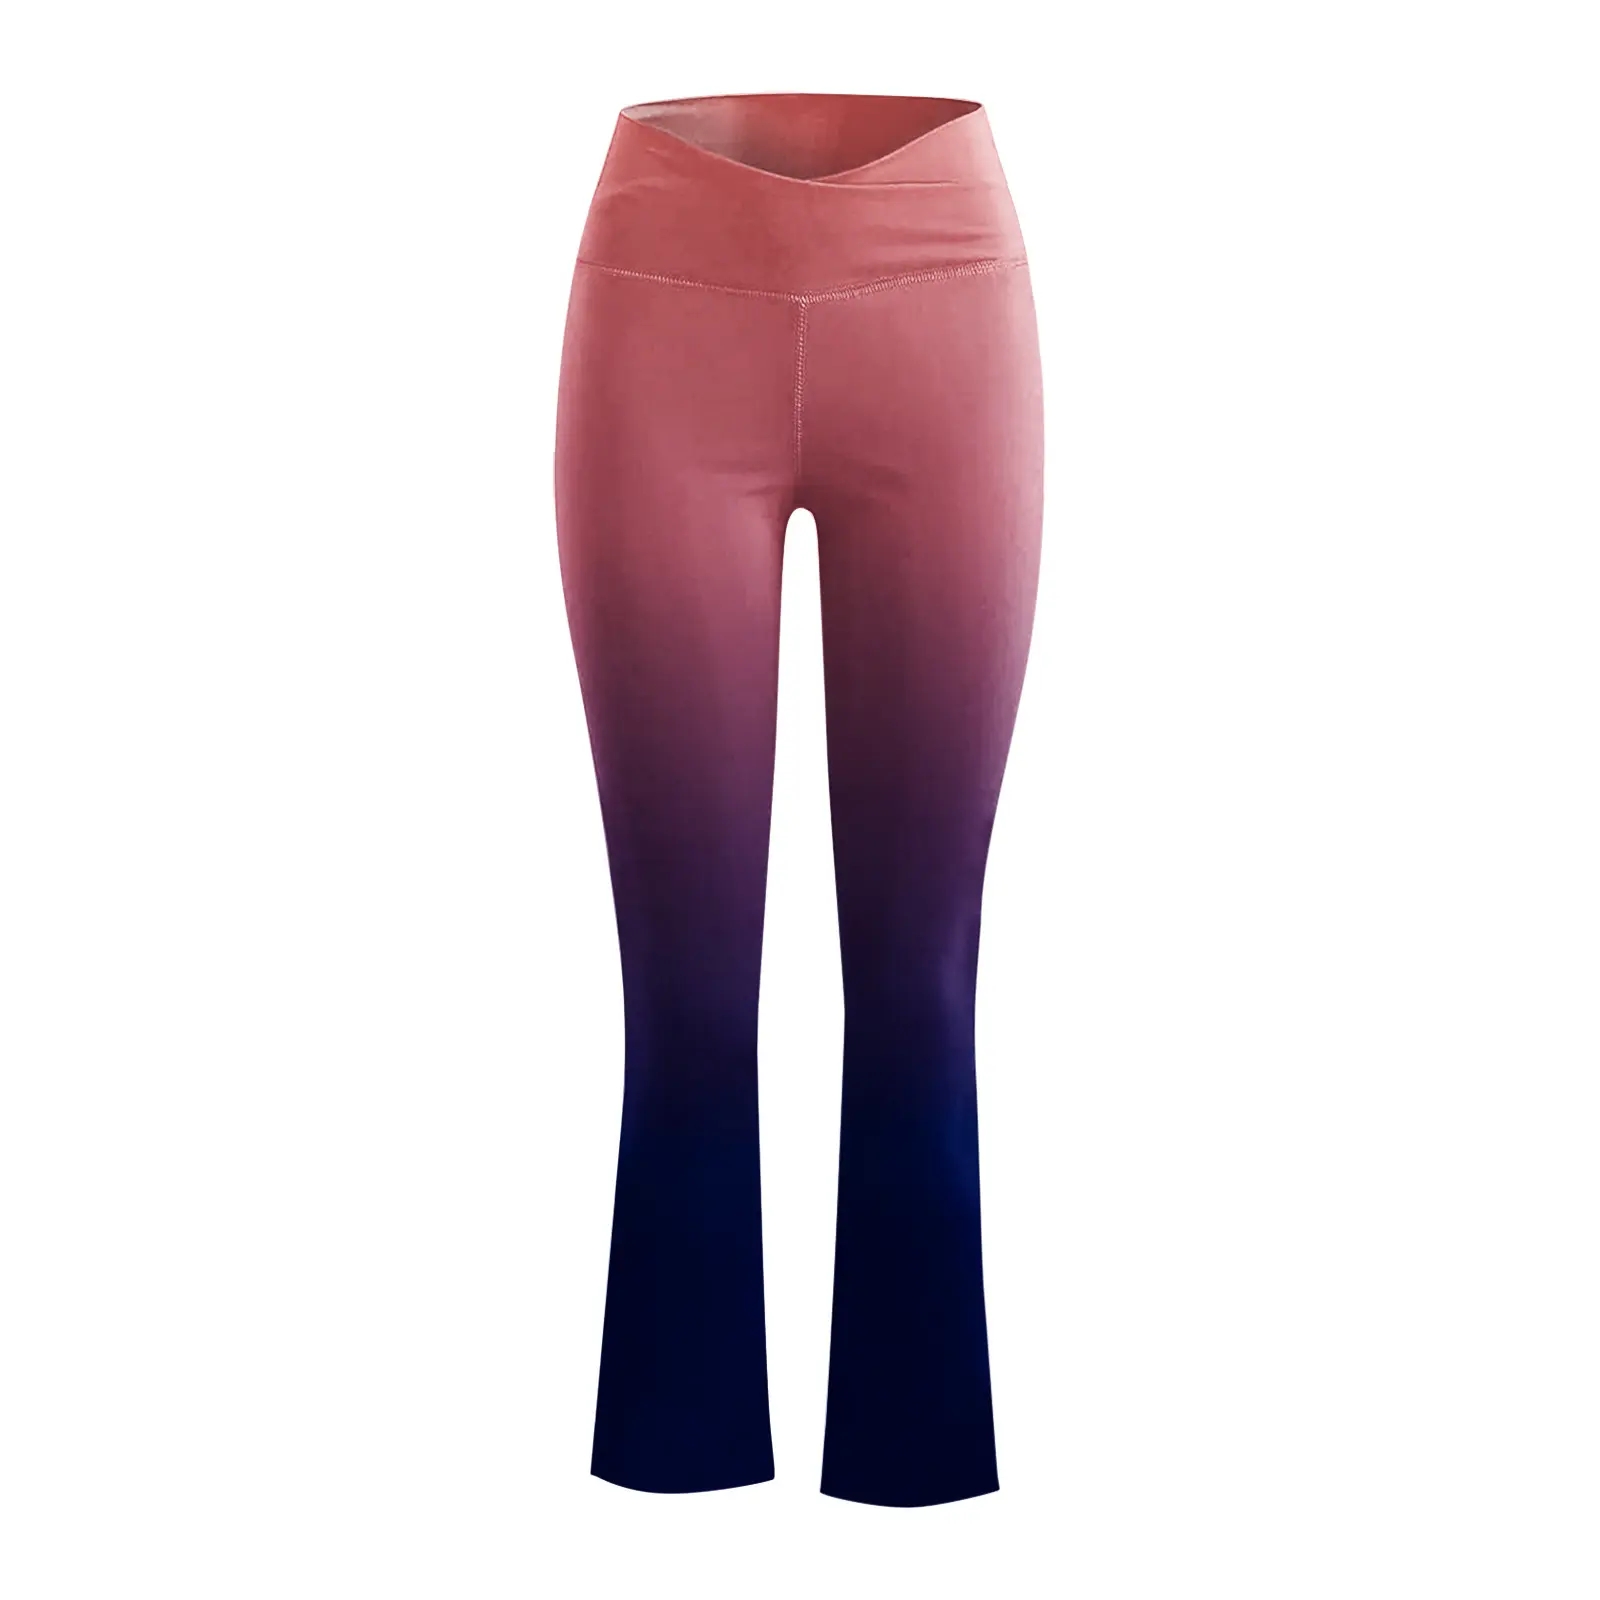 https://www.fitness-tool.com/copy-cropped-flare-yoga-pants-super-factory-zhihui-product/